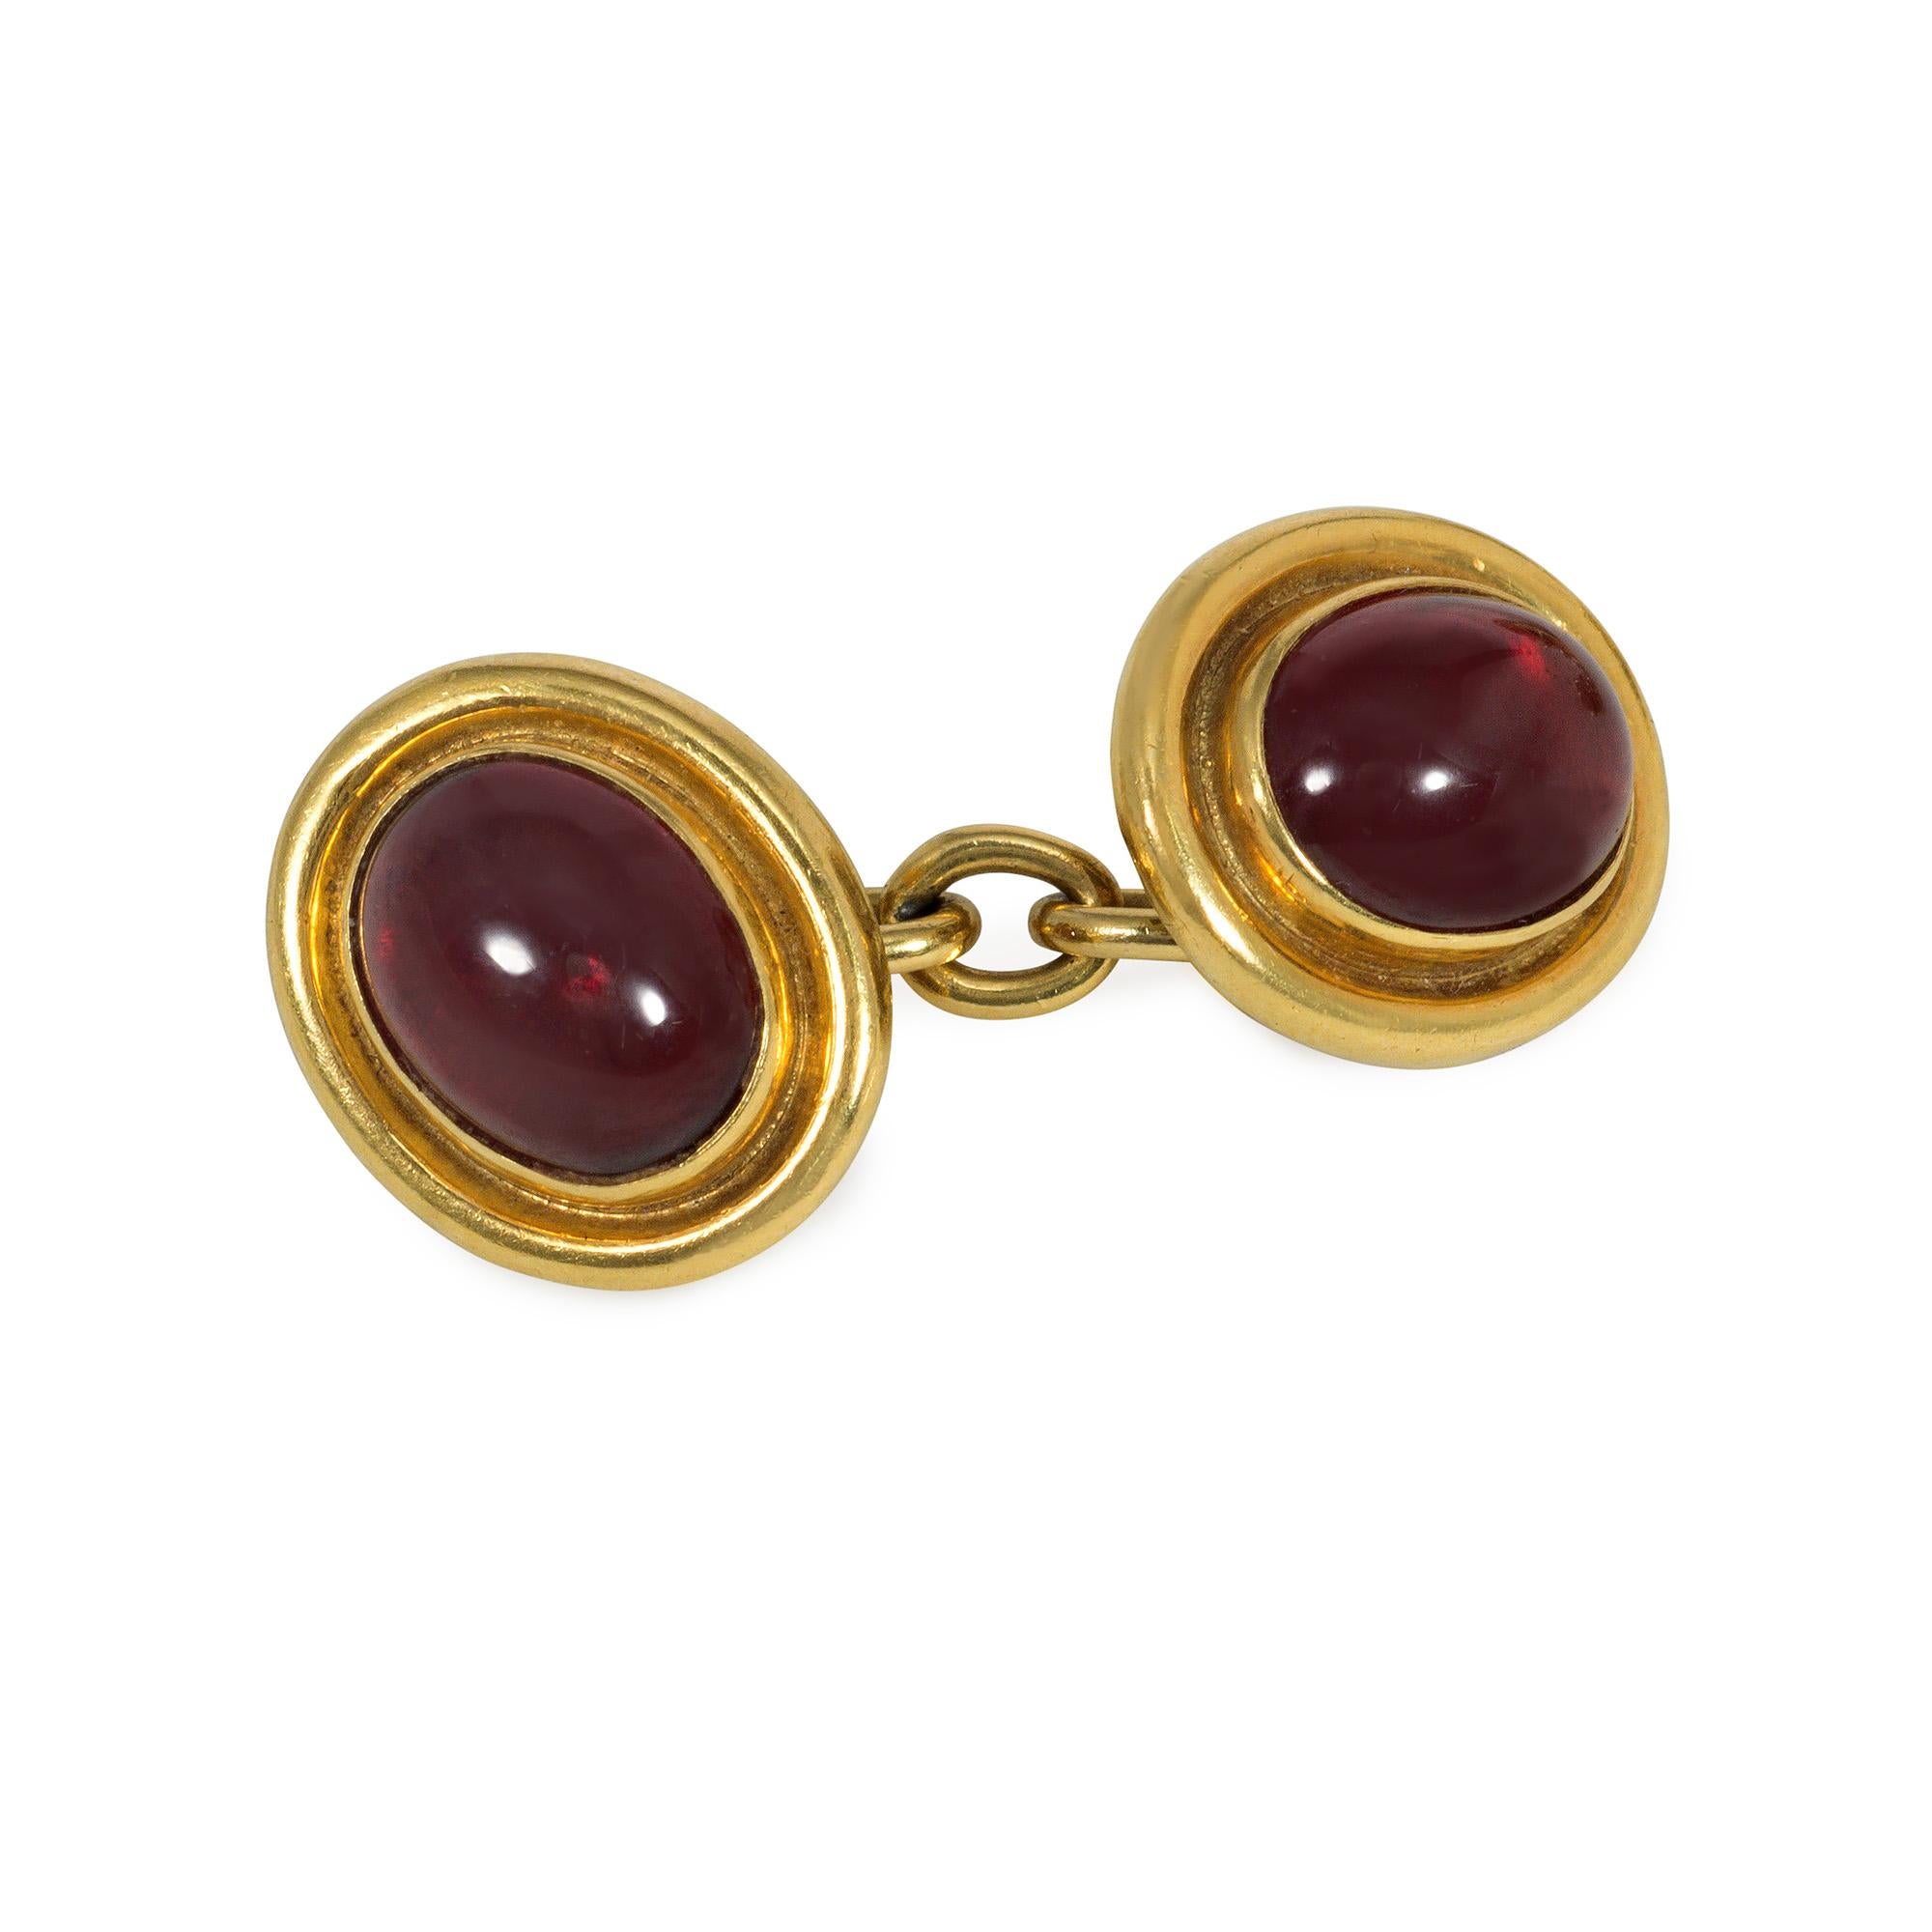 Victorian English Antique Gold and Cabochon Garnet Double Sided Cufflinks